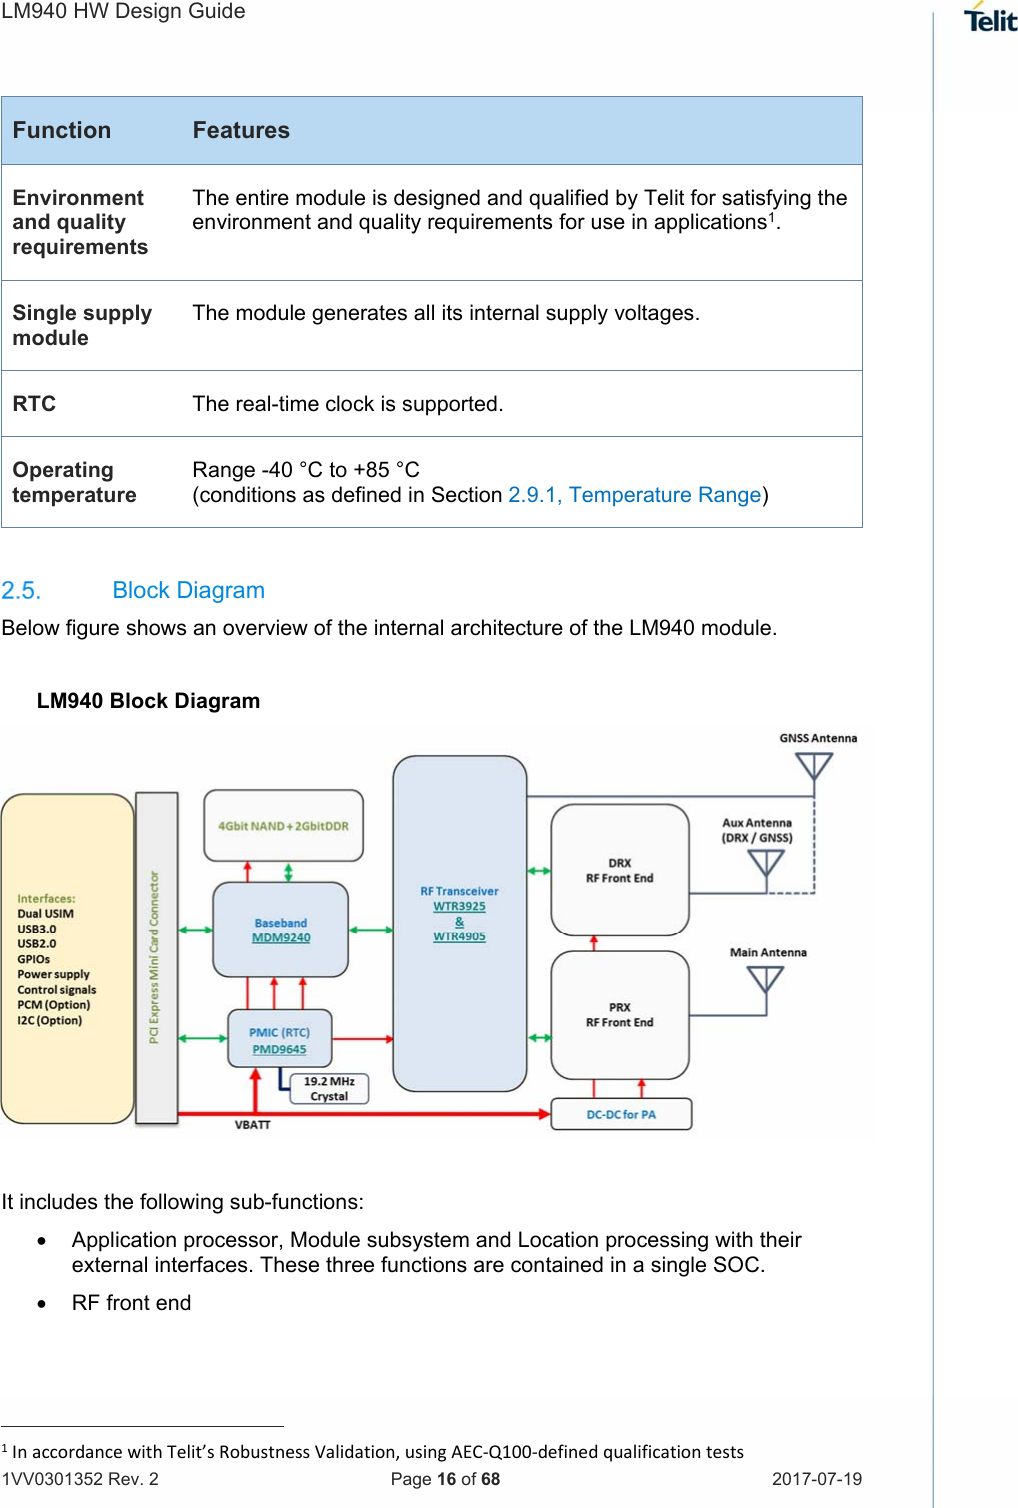 LM940 HW Design Guide   1VV0301352 Rev. 2   Page 16 of 68  2017-07-19  Function  Features Environment and quality requirements The entire module is designed and qualified by Telit for satisfying the environment and quality requirements for use in applications1. Single supply module The module generates all its internal supply voltages. RTC  The real-time clock is supported. Operating temperature Range -40 °C to +85 °C  (conditions as defined in Section 2.9.1, Temperature Range)    Block Diagram Below figure shows an overview of the internal architecture of the LM940 module.   LM940 Block Diagram   It includes the following sub-functions:   Application processor, Module subsystem and Location processing with their external interfaces. These three functions are contained in a single SOC.   RF front end                                                  1InaccordancewithTelit’sRobustnessValidation,usingAEC‐Q100‐definedqualificationtests